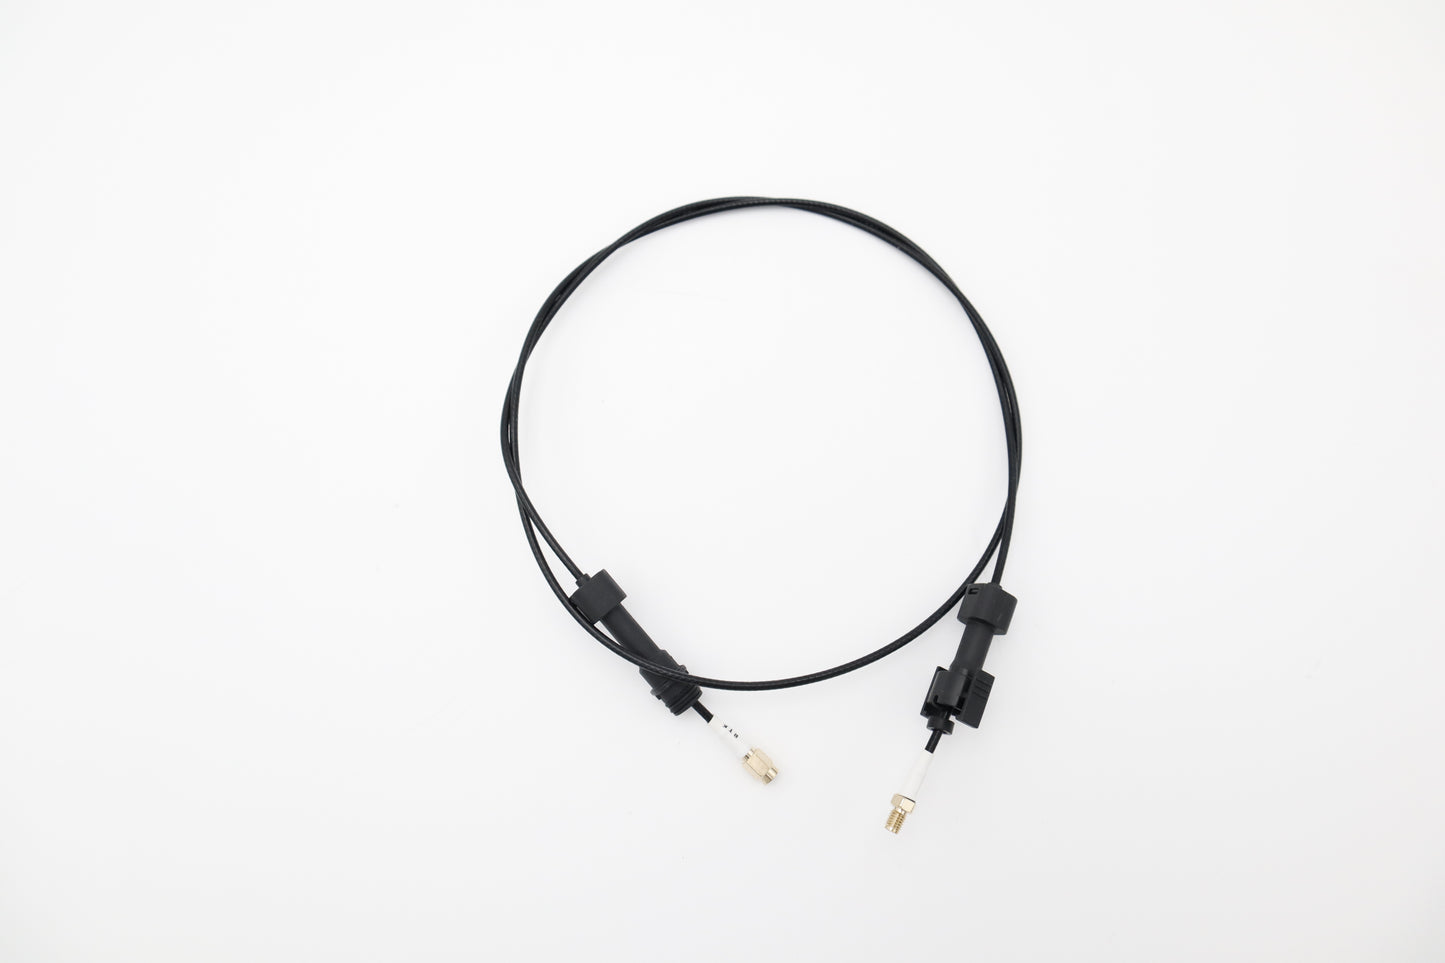 DJI Agras T40 RTK Coaxial Cable